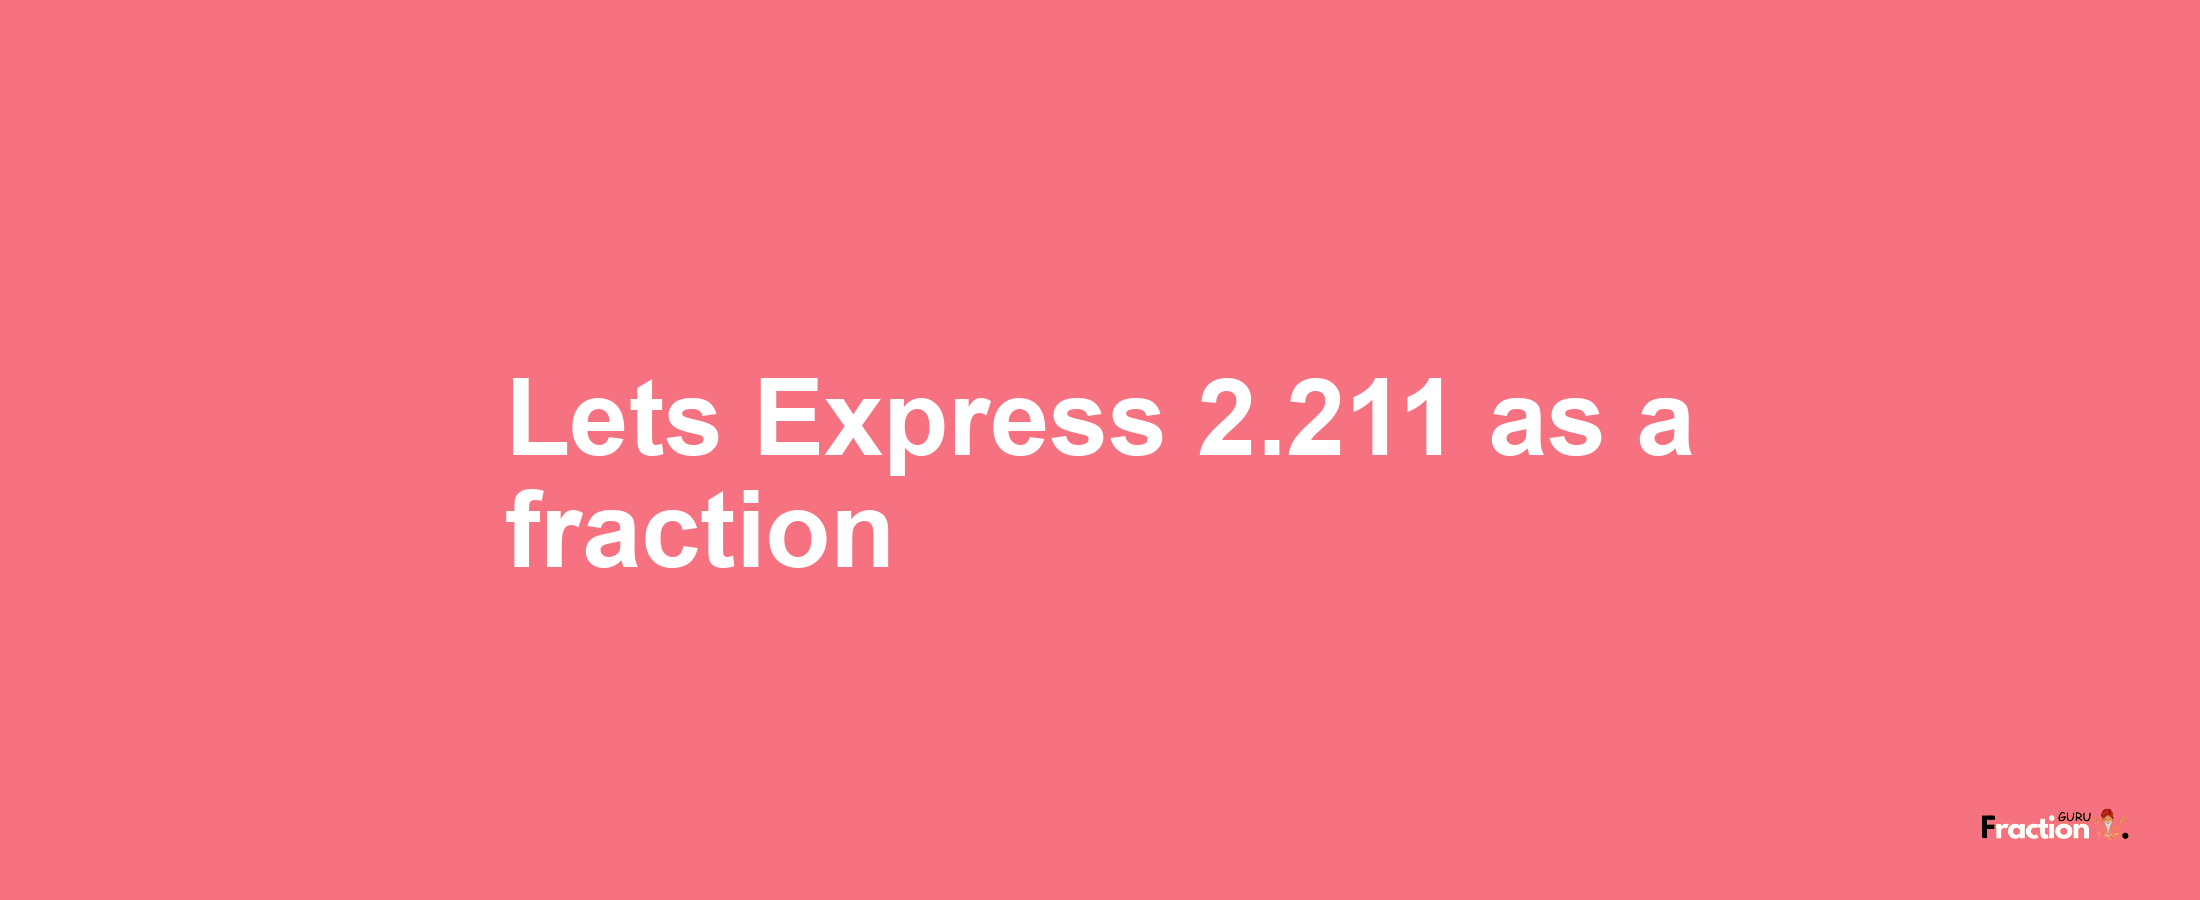 Lets Express 2.211 as afraction